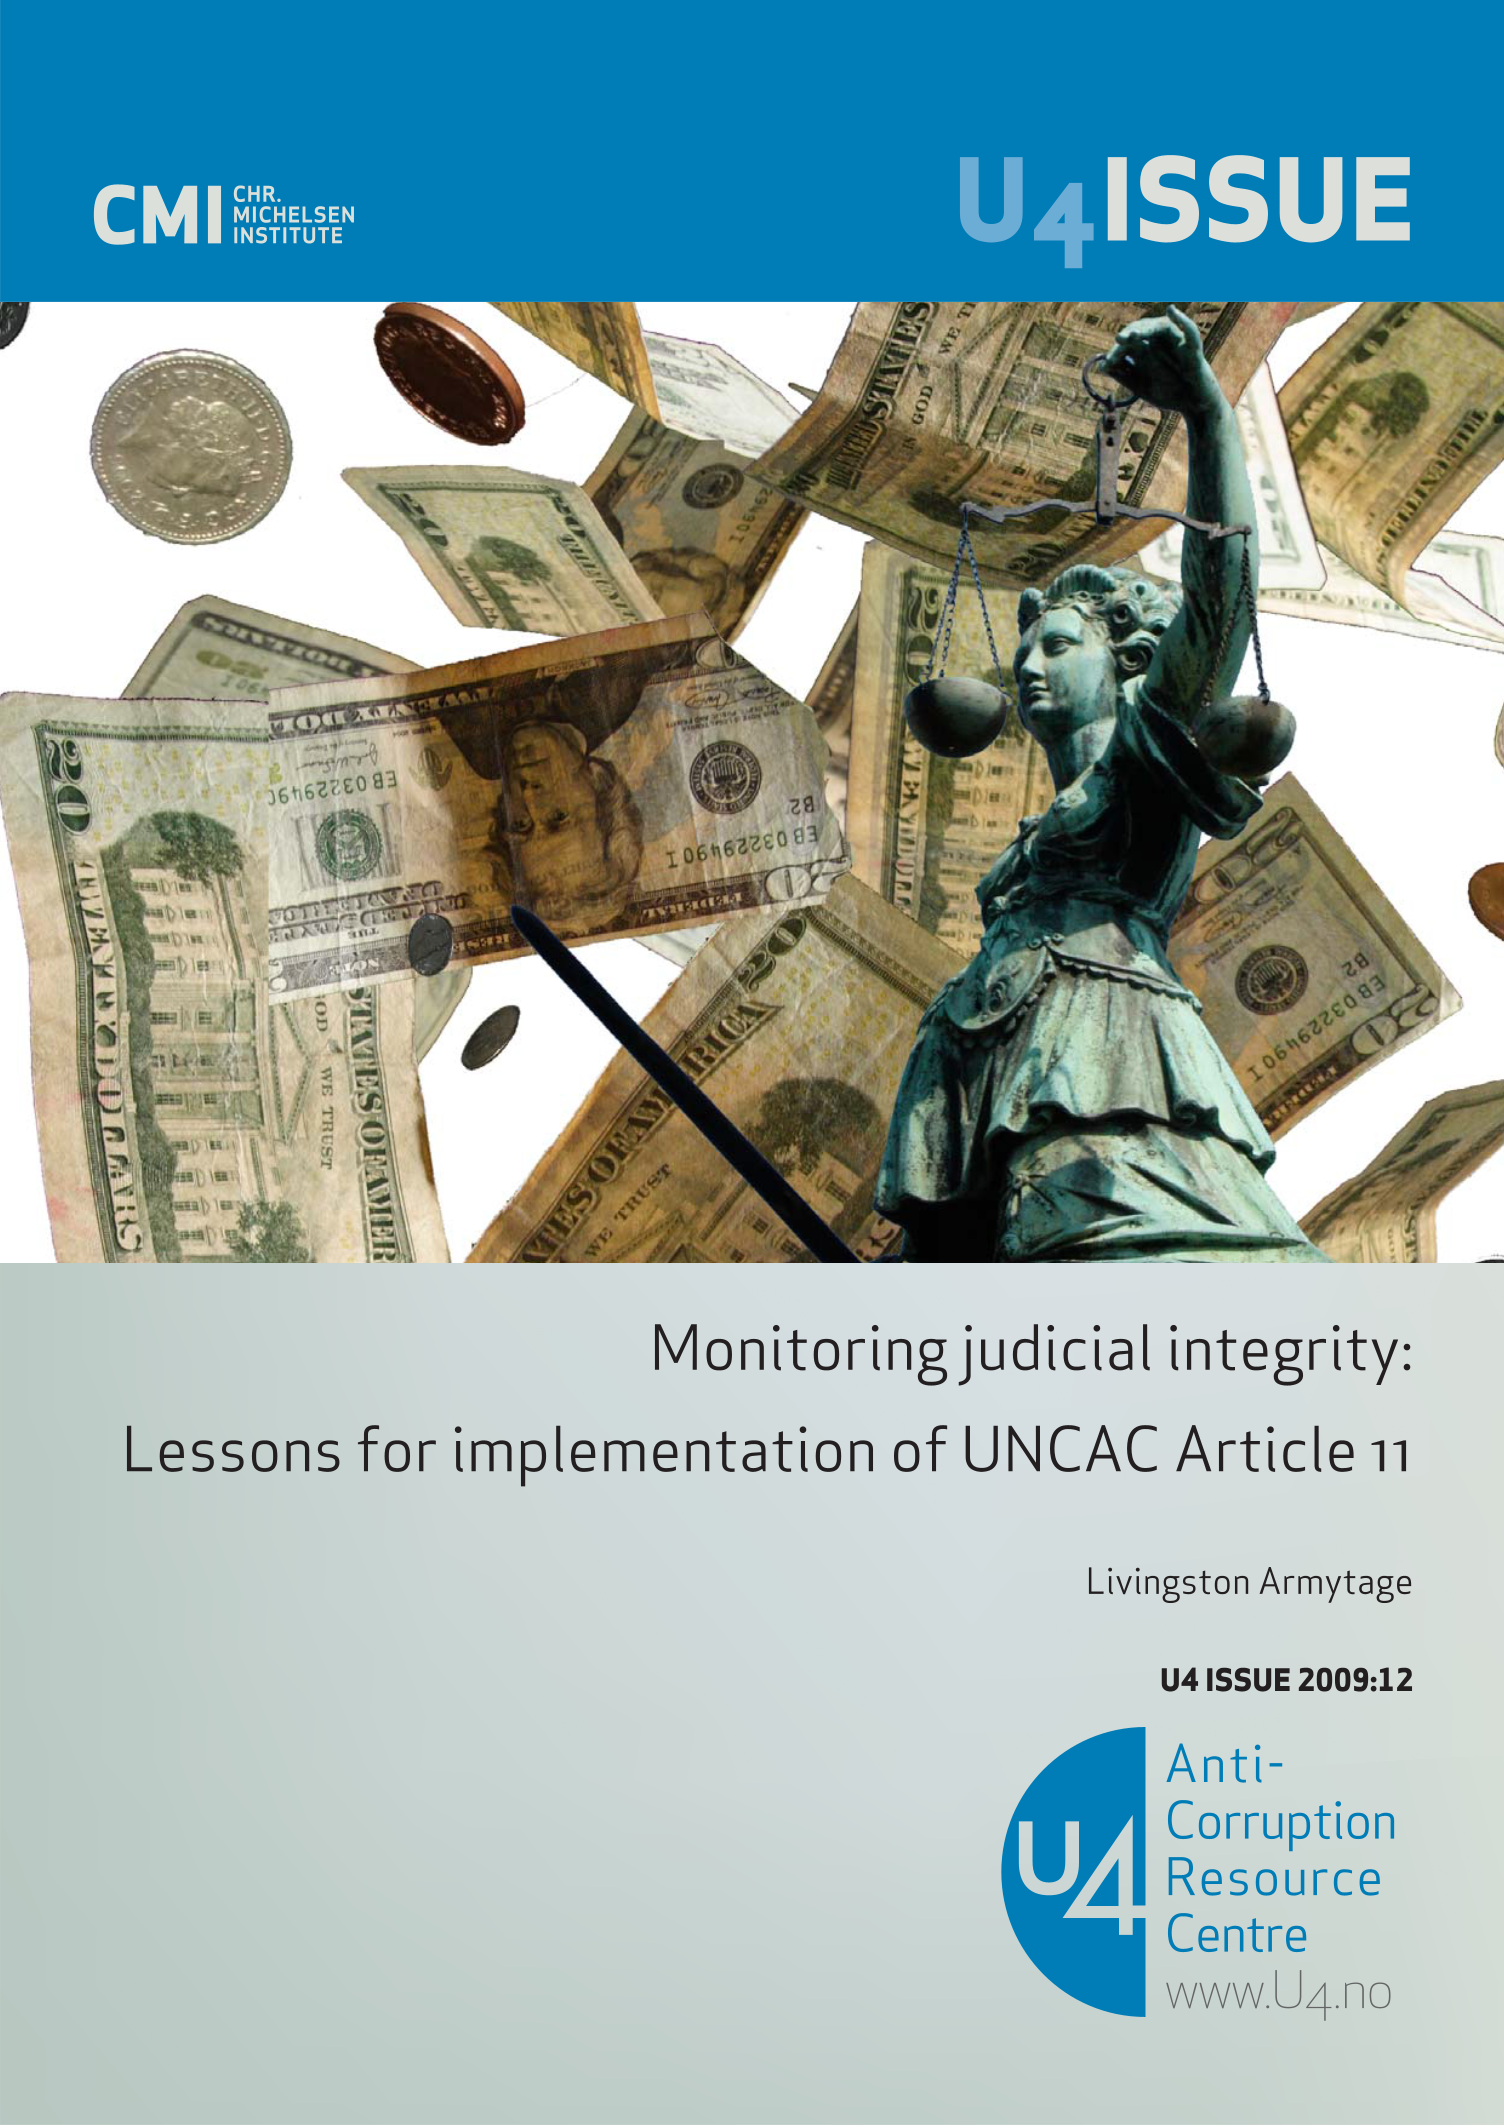 Monitoring judicial integrity: Lessons for implementation of UNCAC Article 11